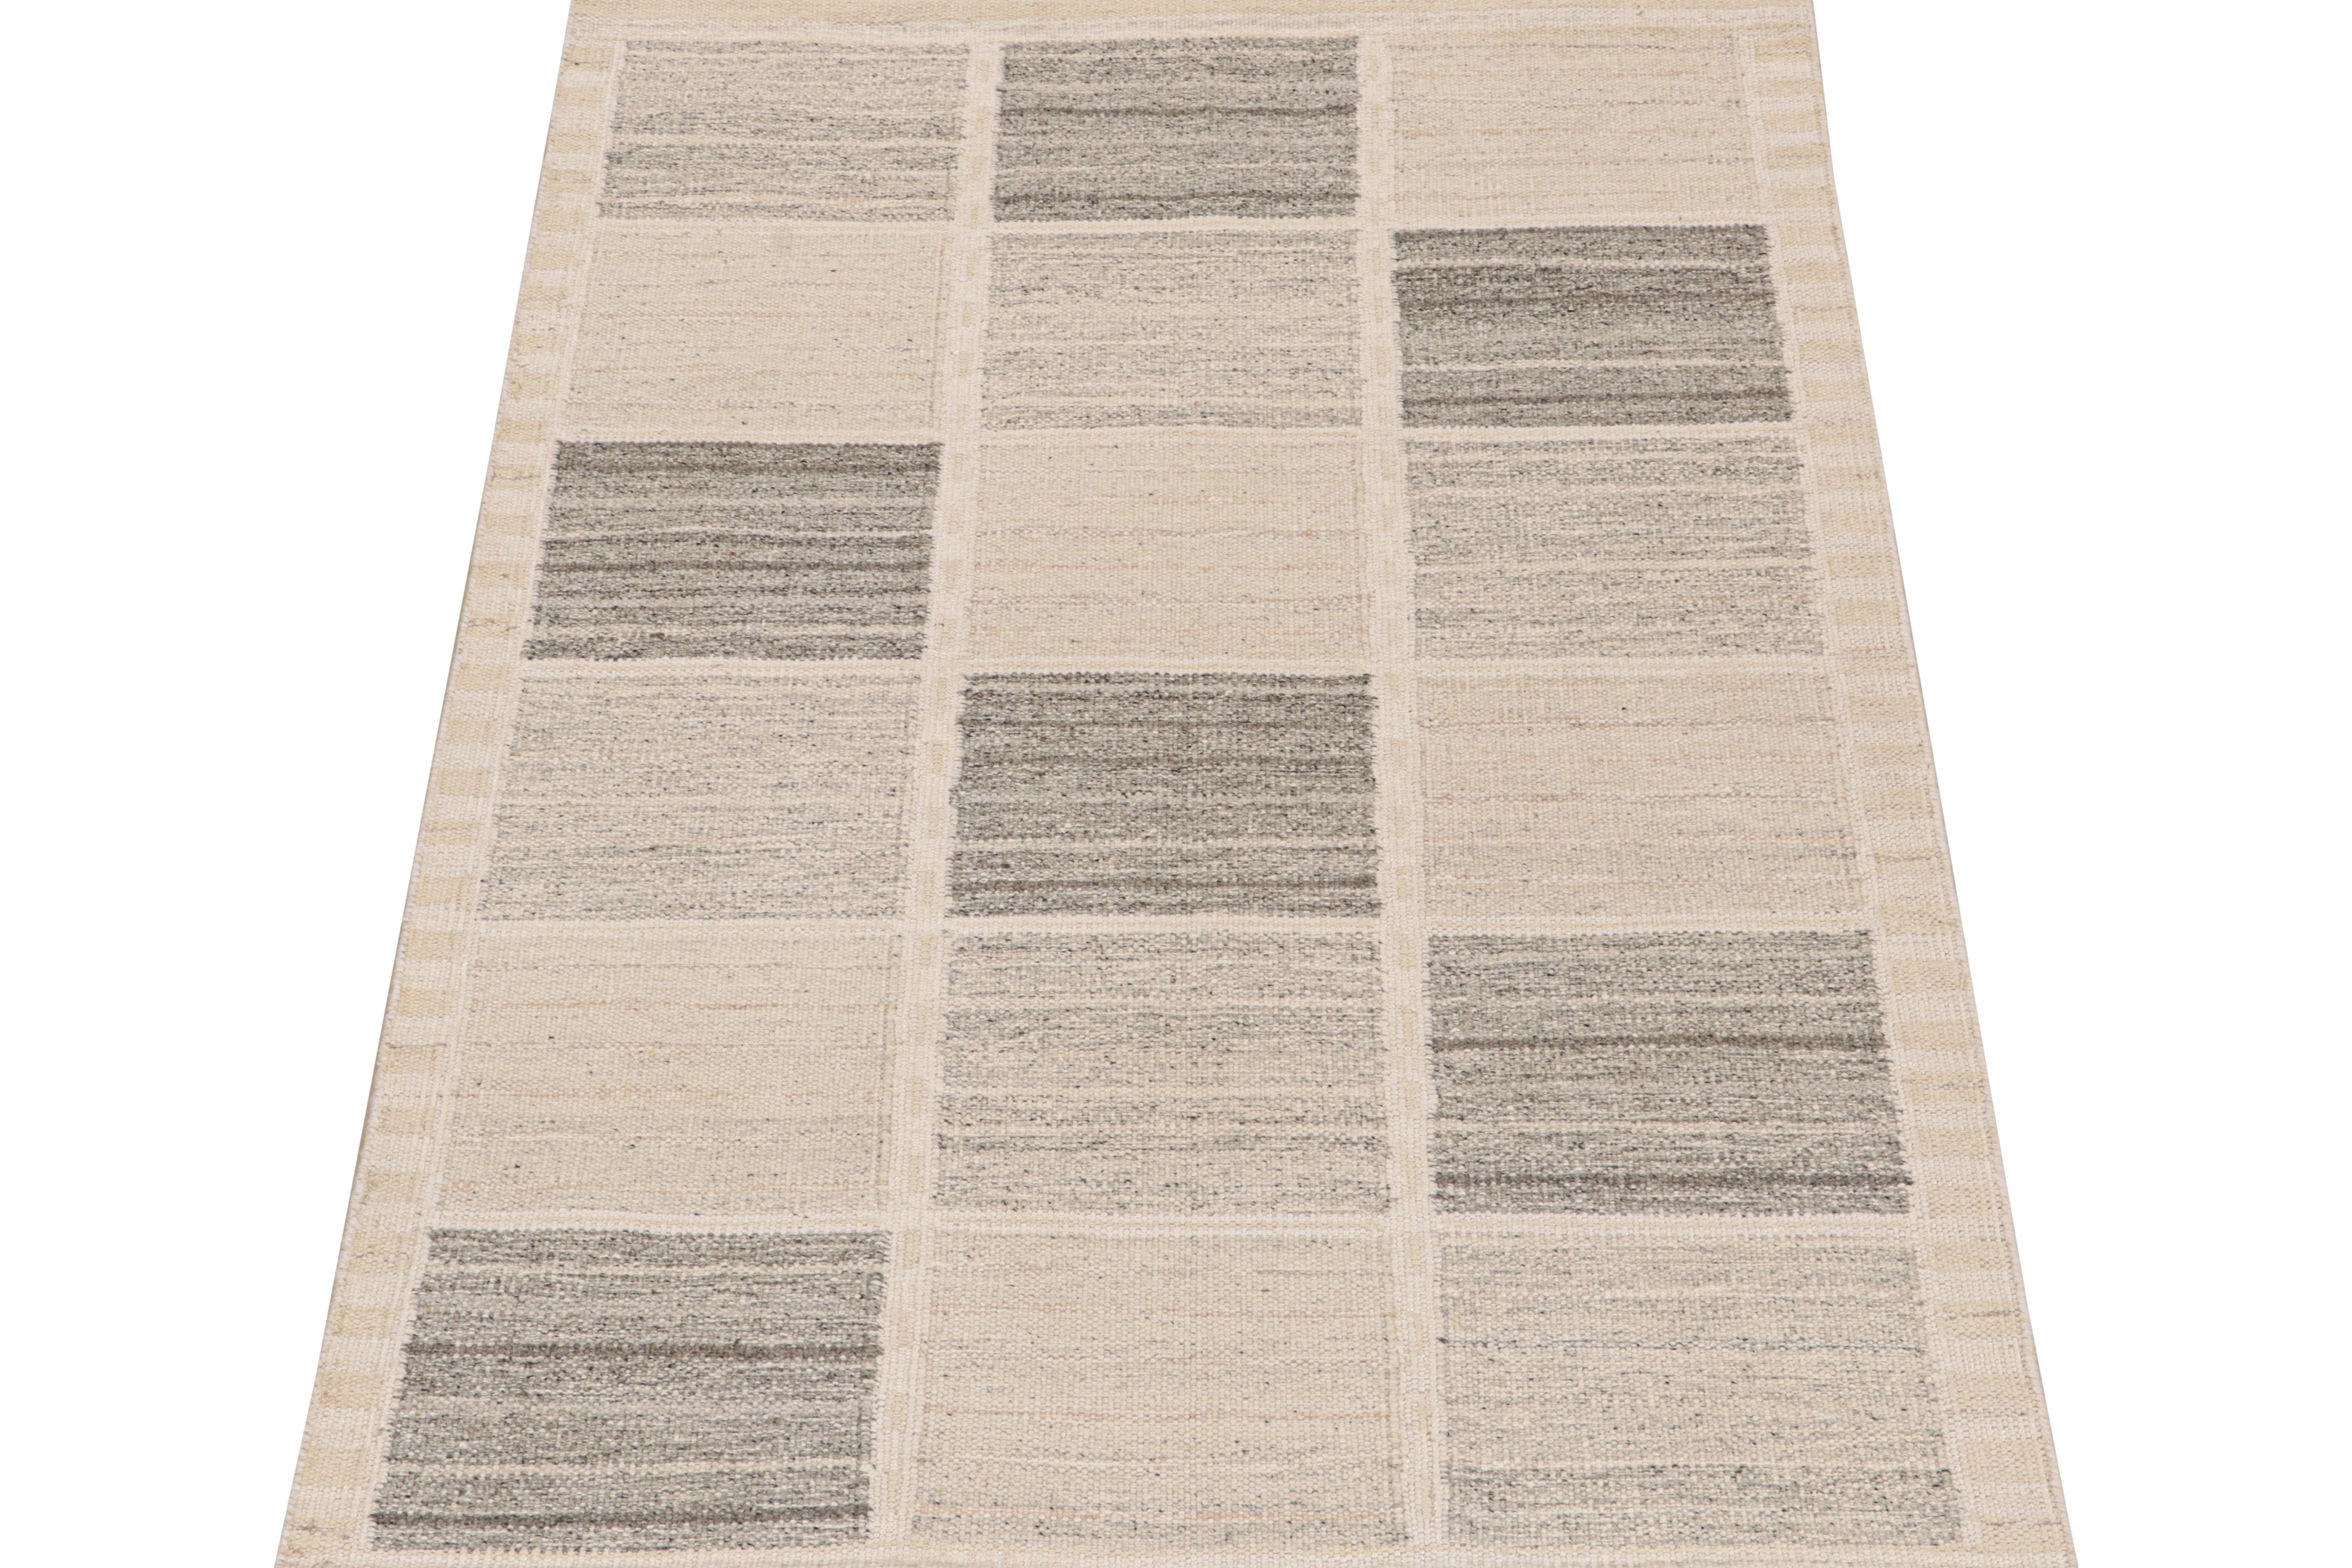 This 5x7 flat weave is a new addition to the Scandinavian Kilim collection by Rug & Kilim. Handwoven in wool and natural yarns, its design reflects a contemporary take on mid-century Rollakans and Swedish Deco style.

On the Design:

This new flat